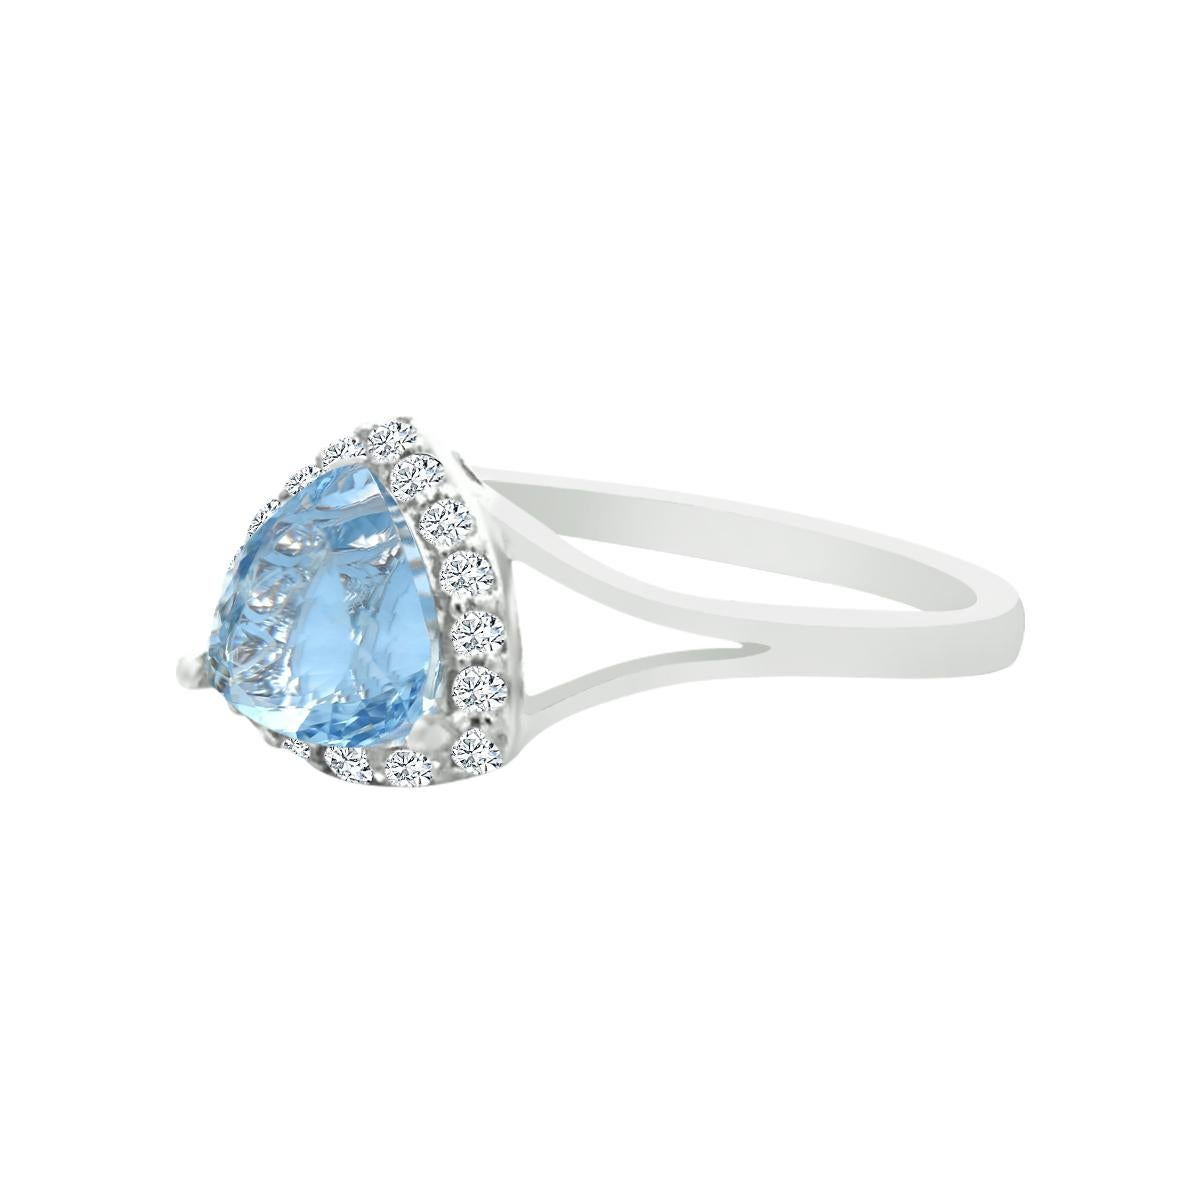 An Embodiment Of Simply Luxury, This Stunning 14K White Gold Trilogy Ring Features A 7mm Trillion Cut Aquamarine Gemstone With Diamonds.
The Precious Gemstone Is Claw Set And Designed Perfectly For Everyday Wear, This Beautiful Piece Would Also Make